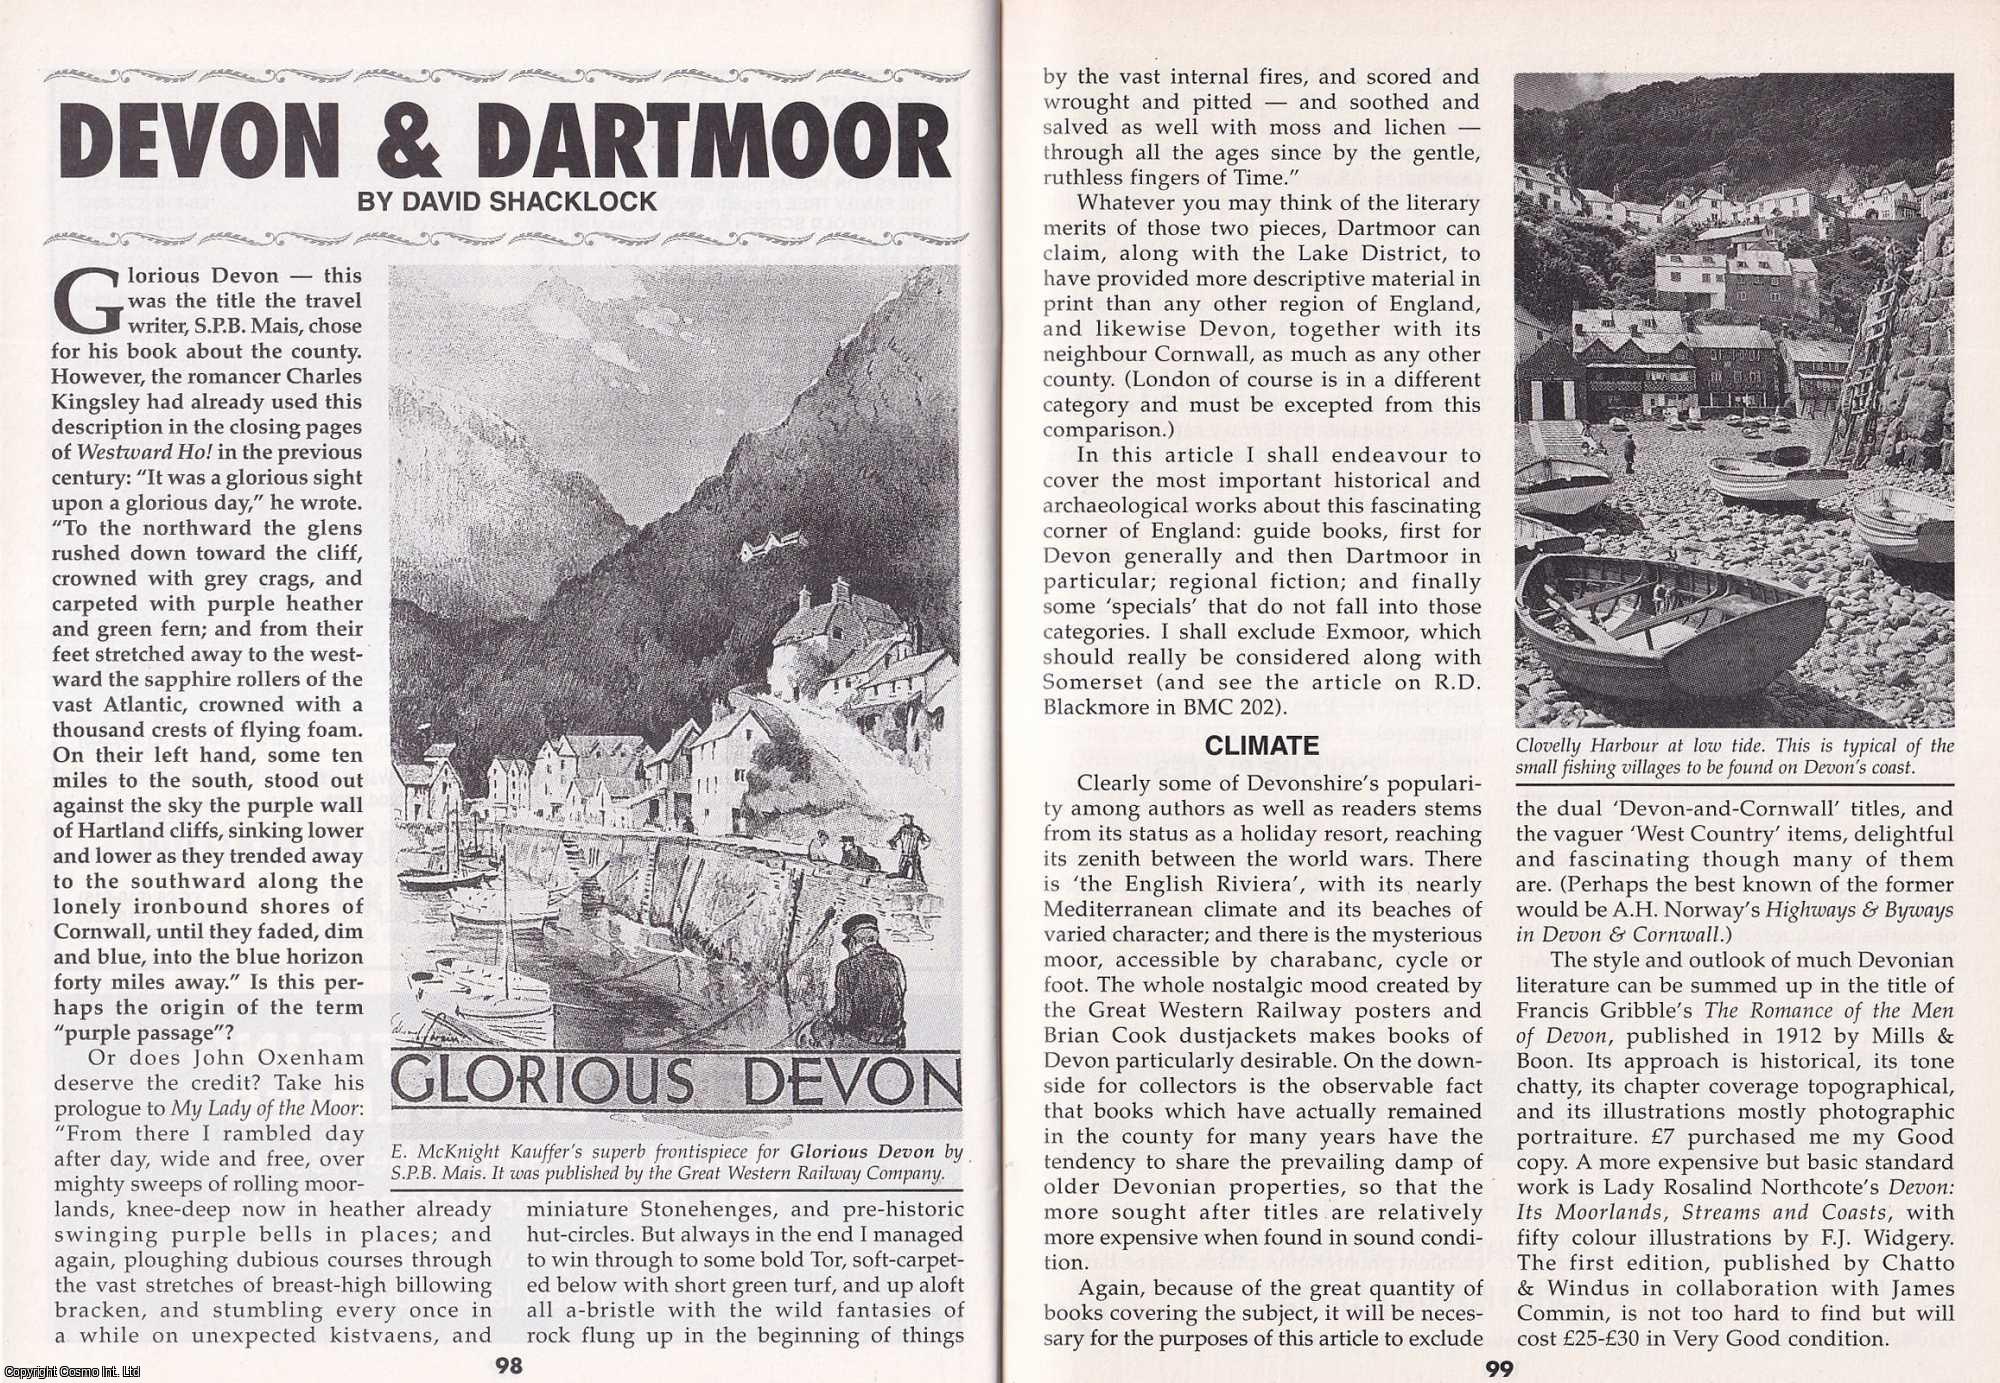 David Shacklock - Devon & Dartmoor. This is an original article separated from an issue of The Book & Magazine Collector publication.